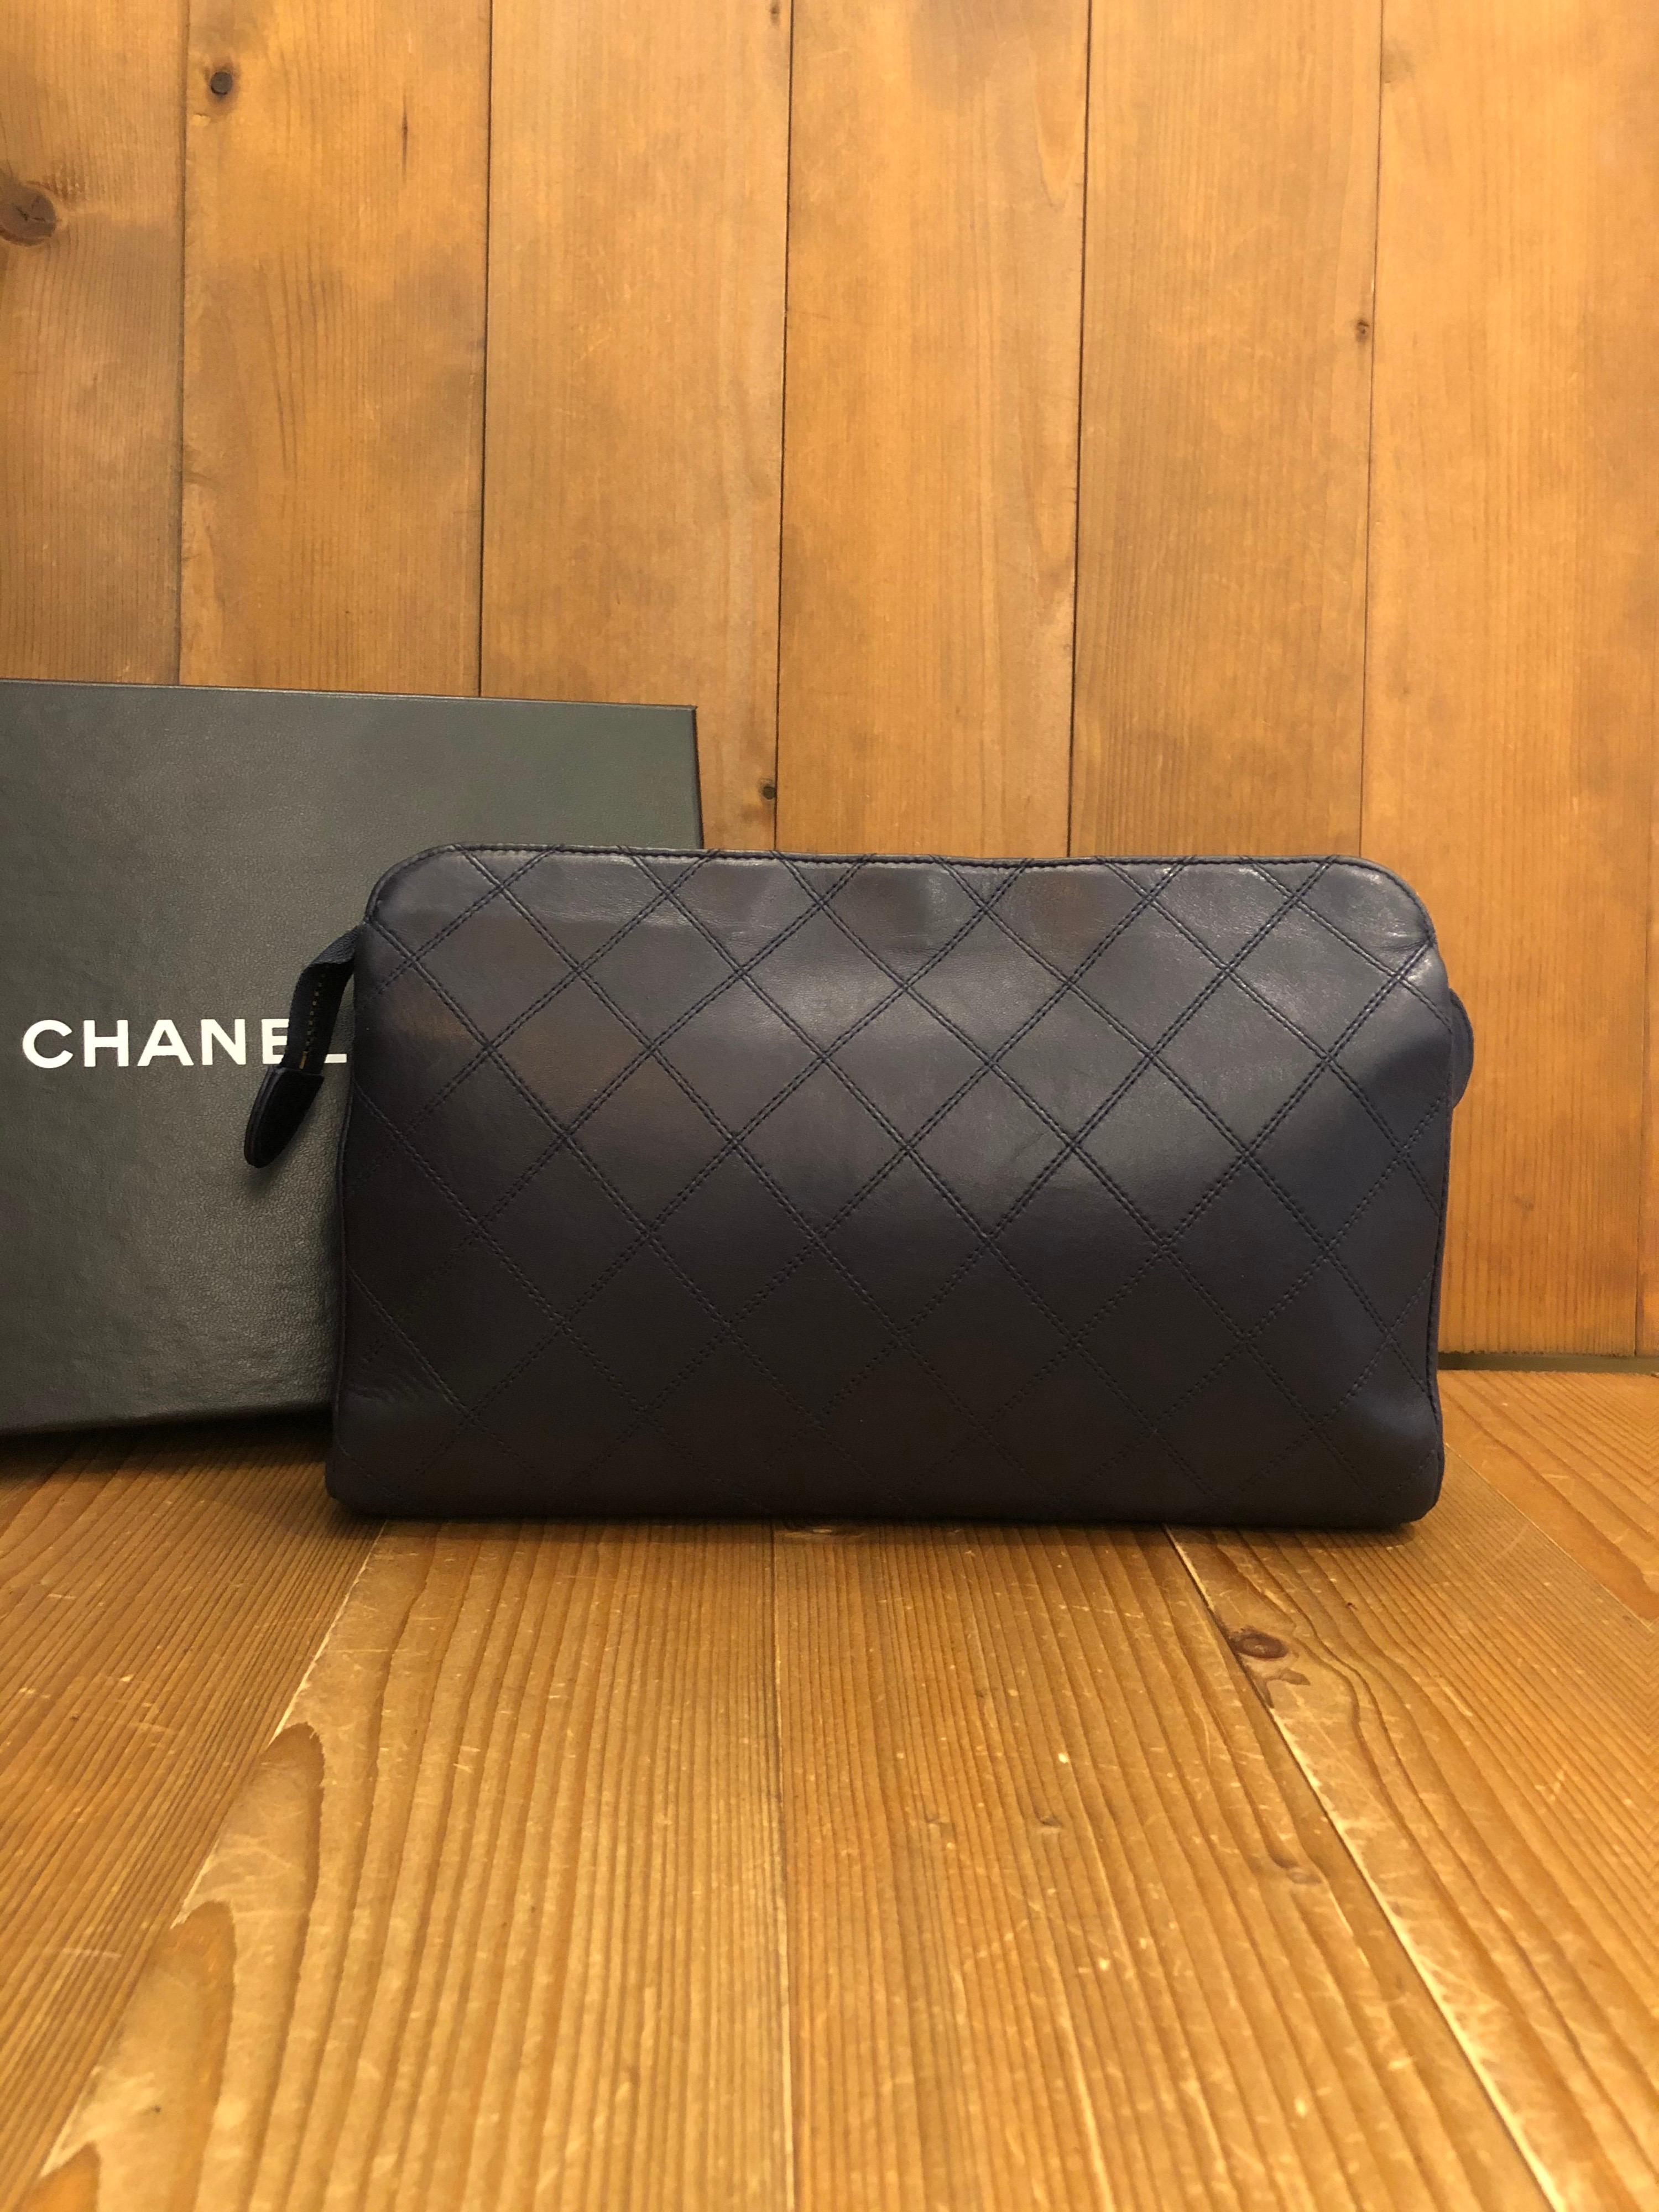 1990s Chanel Clutch in dark navy quilted Lambskin. Interior fully refurbished by Chanel store. Original tags preserved but holo sticker removed. Comes with original Chanel box.

Material: Lambskin leather 
Color: Navy
Origin: France 
Measurements: